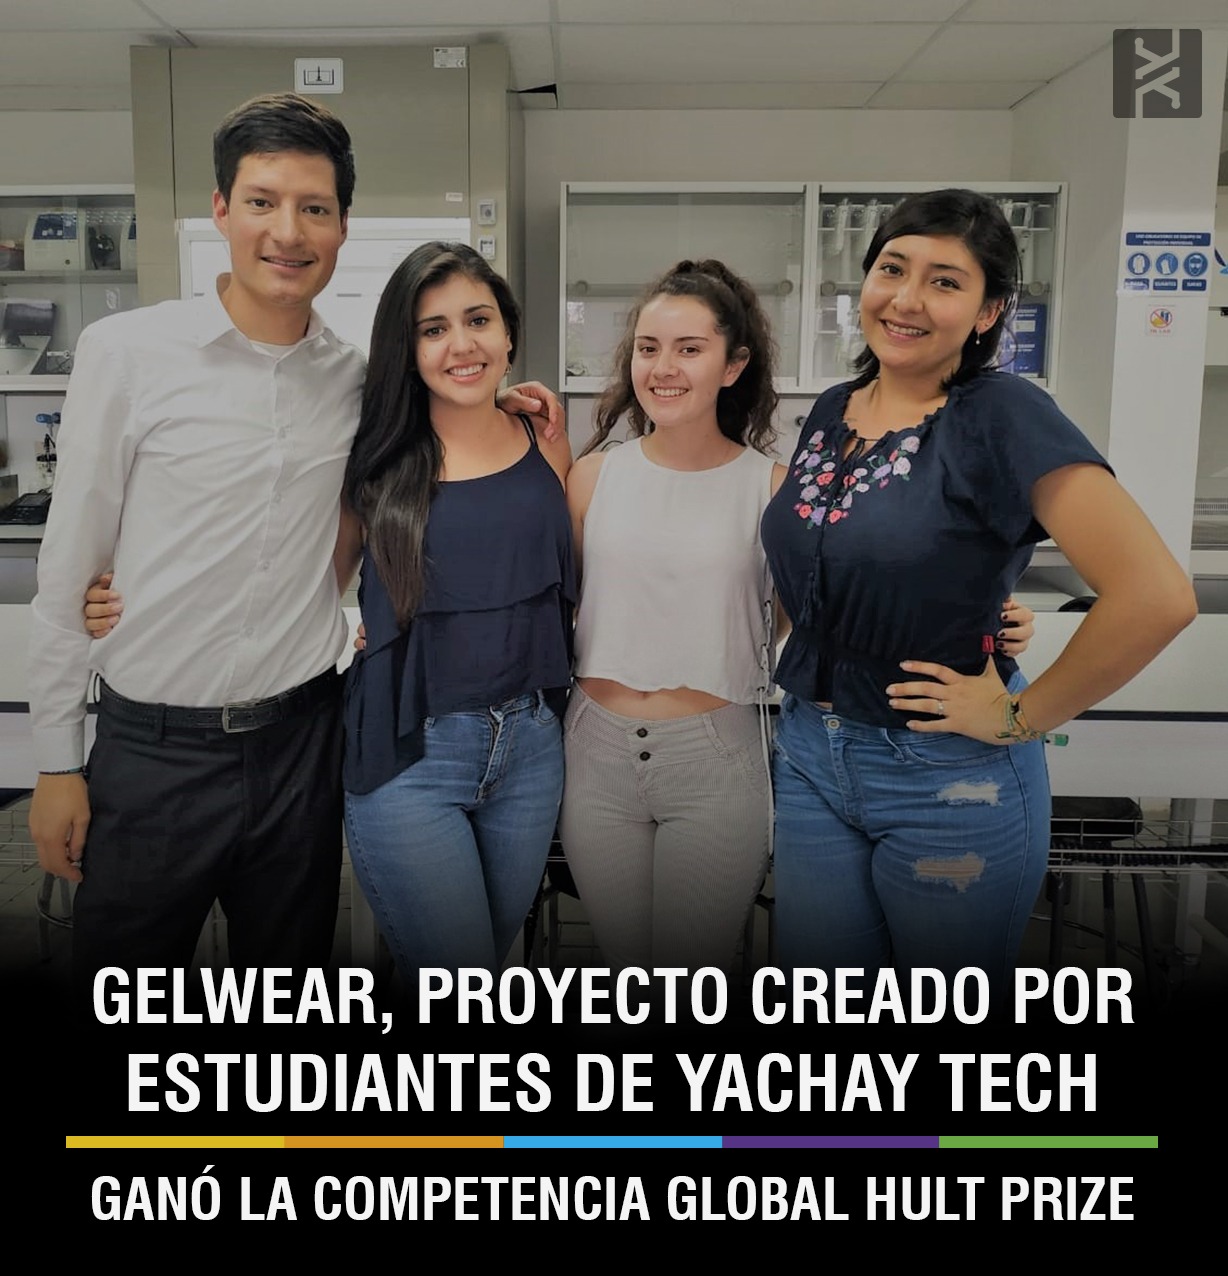 GELWEAR, A PROJECT CREATED BY YACHAY TECH STUDENTS WINS THE GLOBAL HULT PRIZE COMPETITION